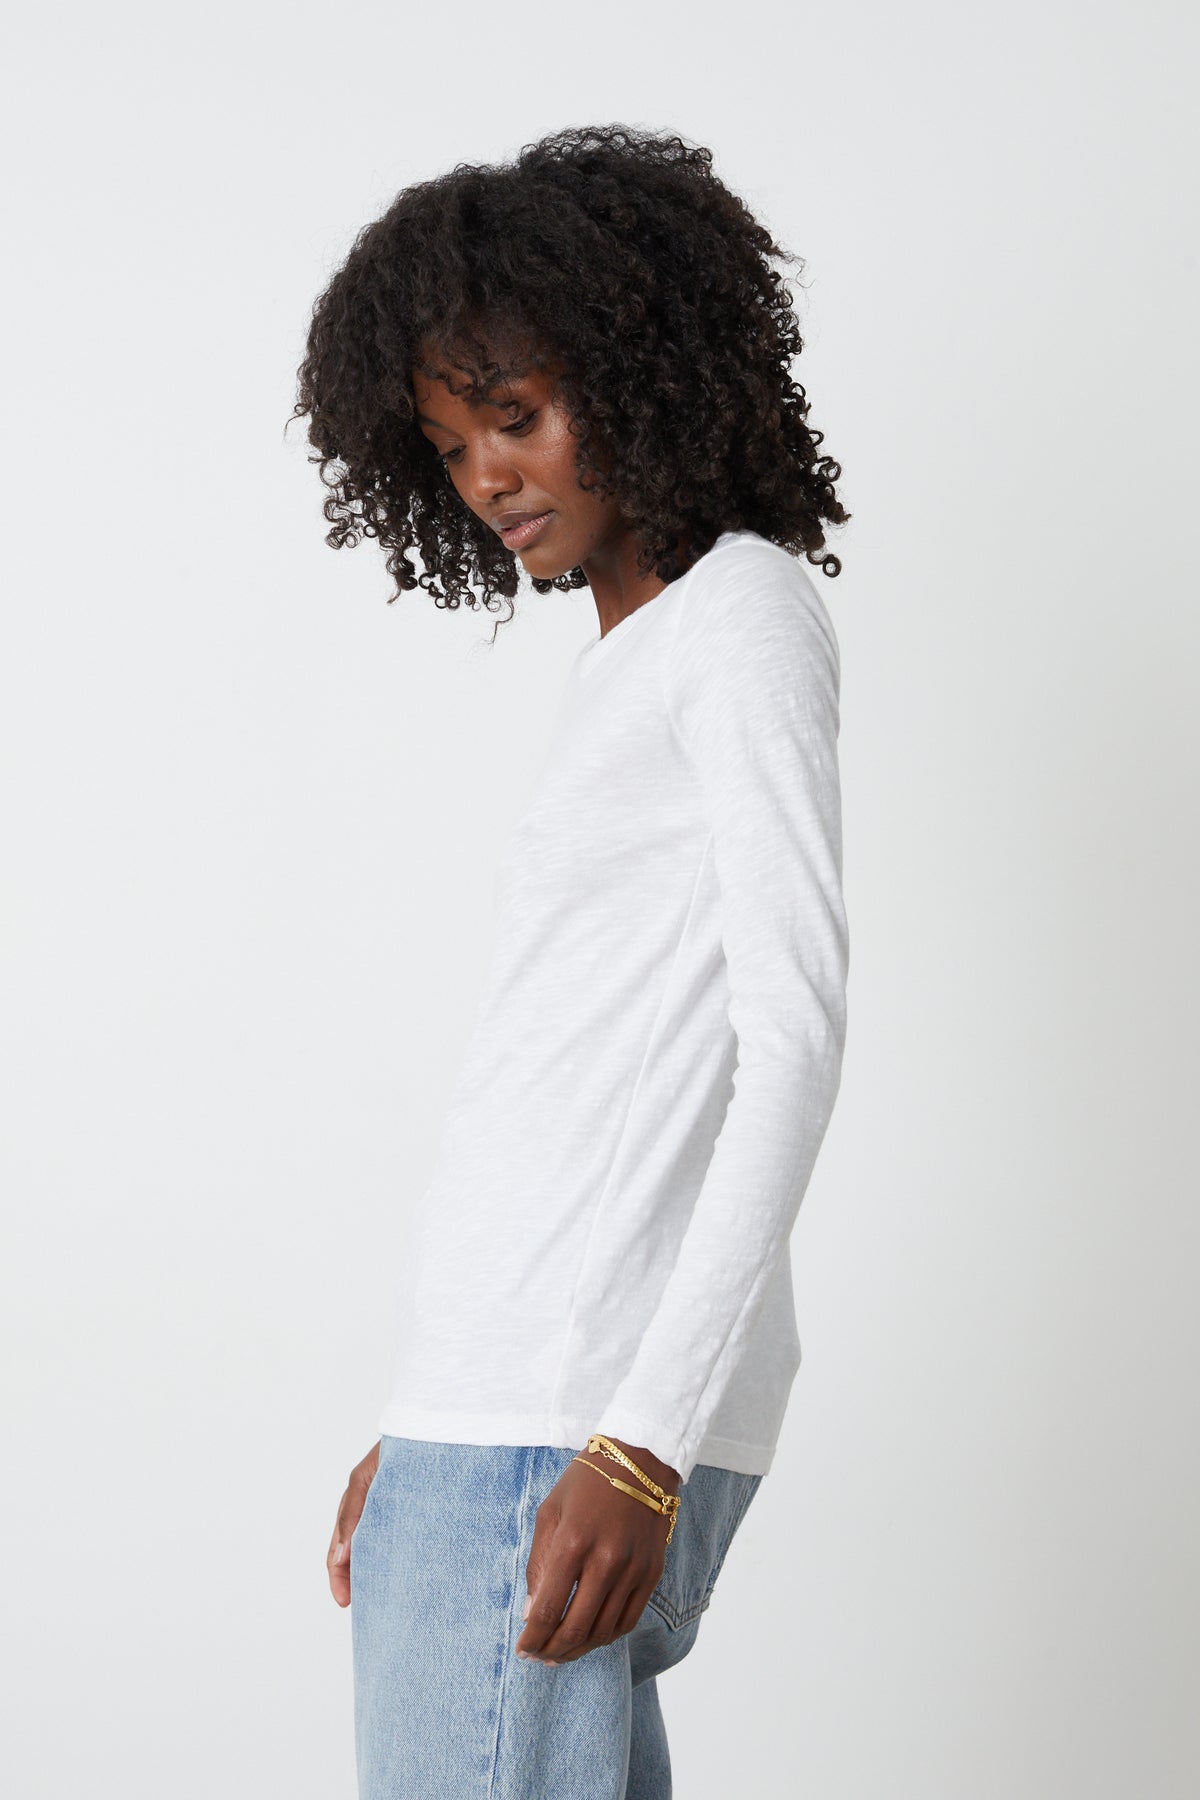 The model is wearing a white Lizzie Original Slub Long Sleeve Tee by Velvet by Graham & Spencer and jeans.-26235766145217